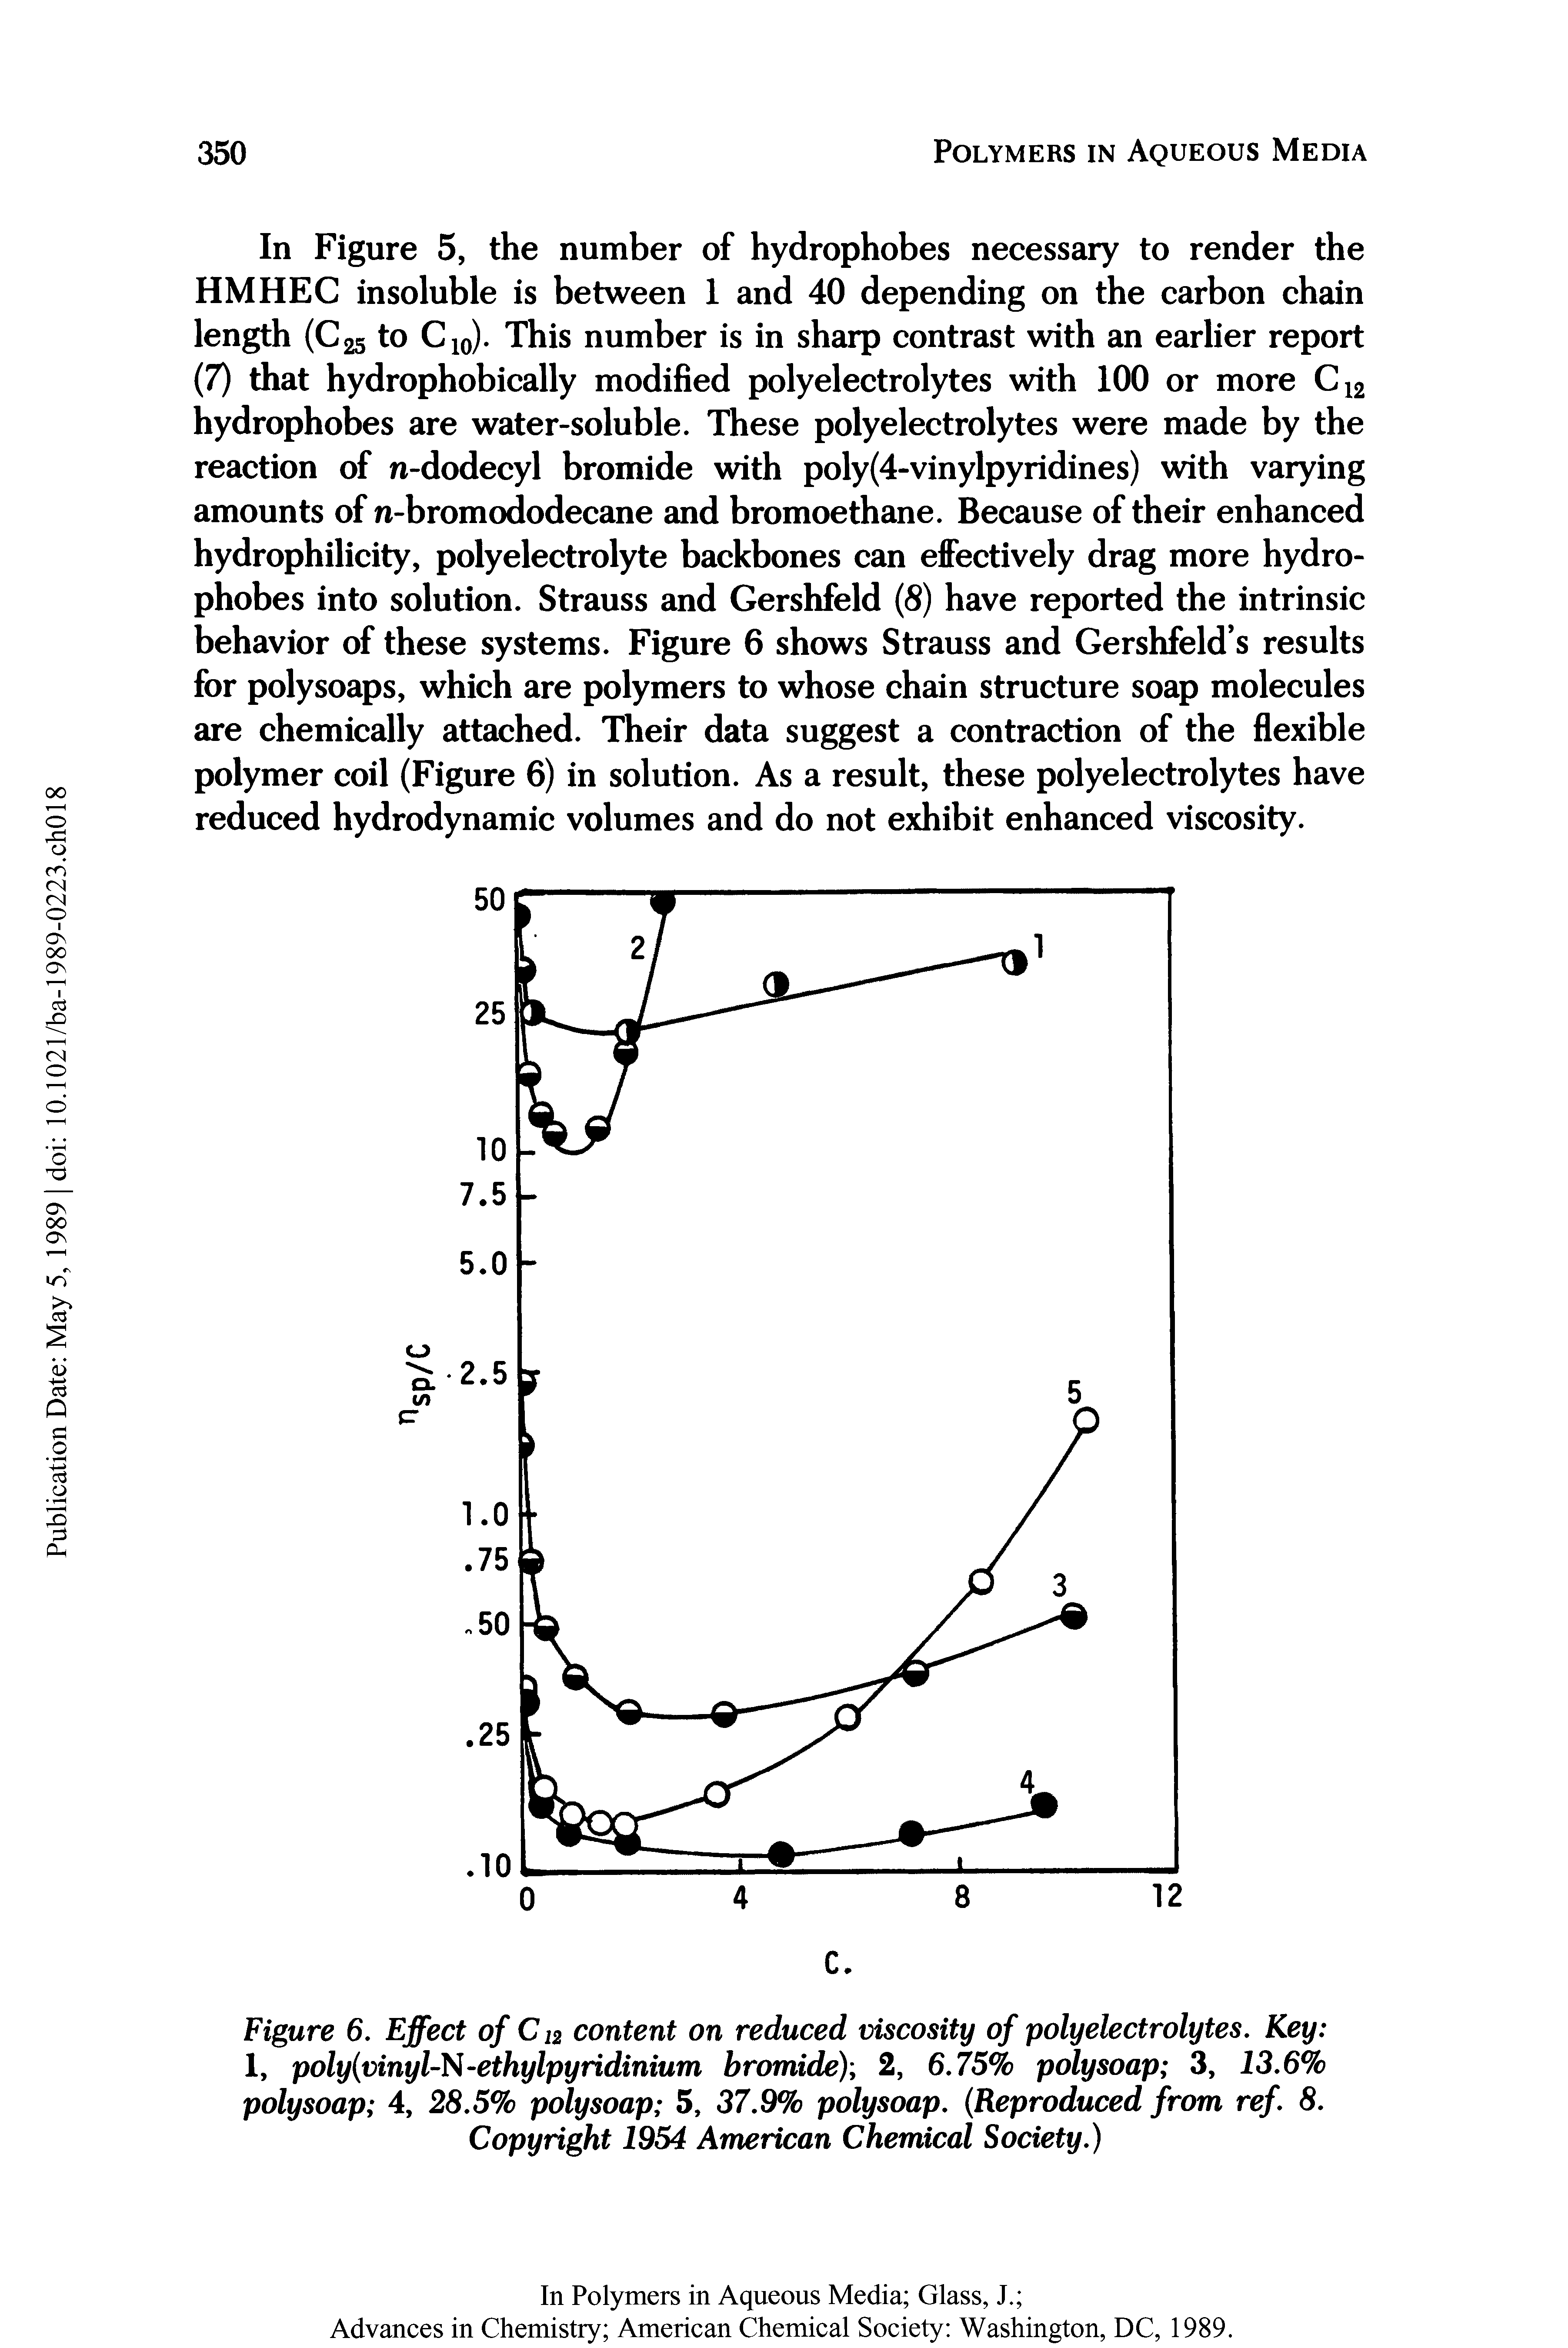 Figure 6. Effect of C12 content on reduced viscosity of polyelectrolytes. Key 1, polyivinyl-N-ethylpyridinium bromide) 2, 6.75% polysoap 3, 13.6% poly soap 4, 28.5% poly soap 5, 37.9% polysoap. Reproduced from ref. 8. Copyright 1954 American Chemical Society.)...